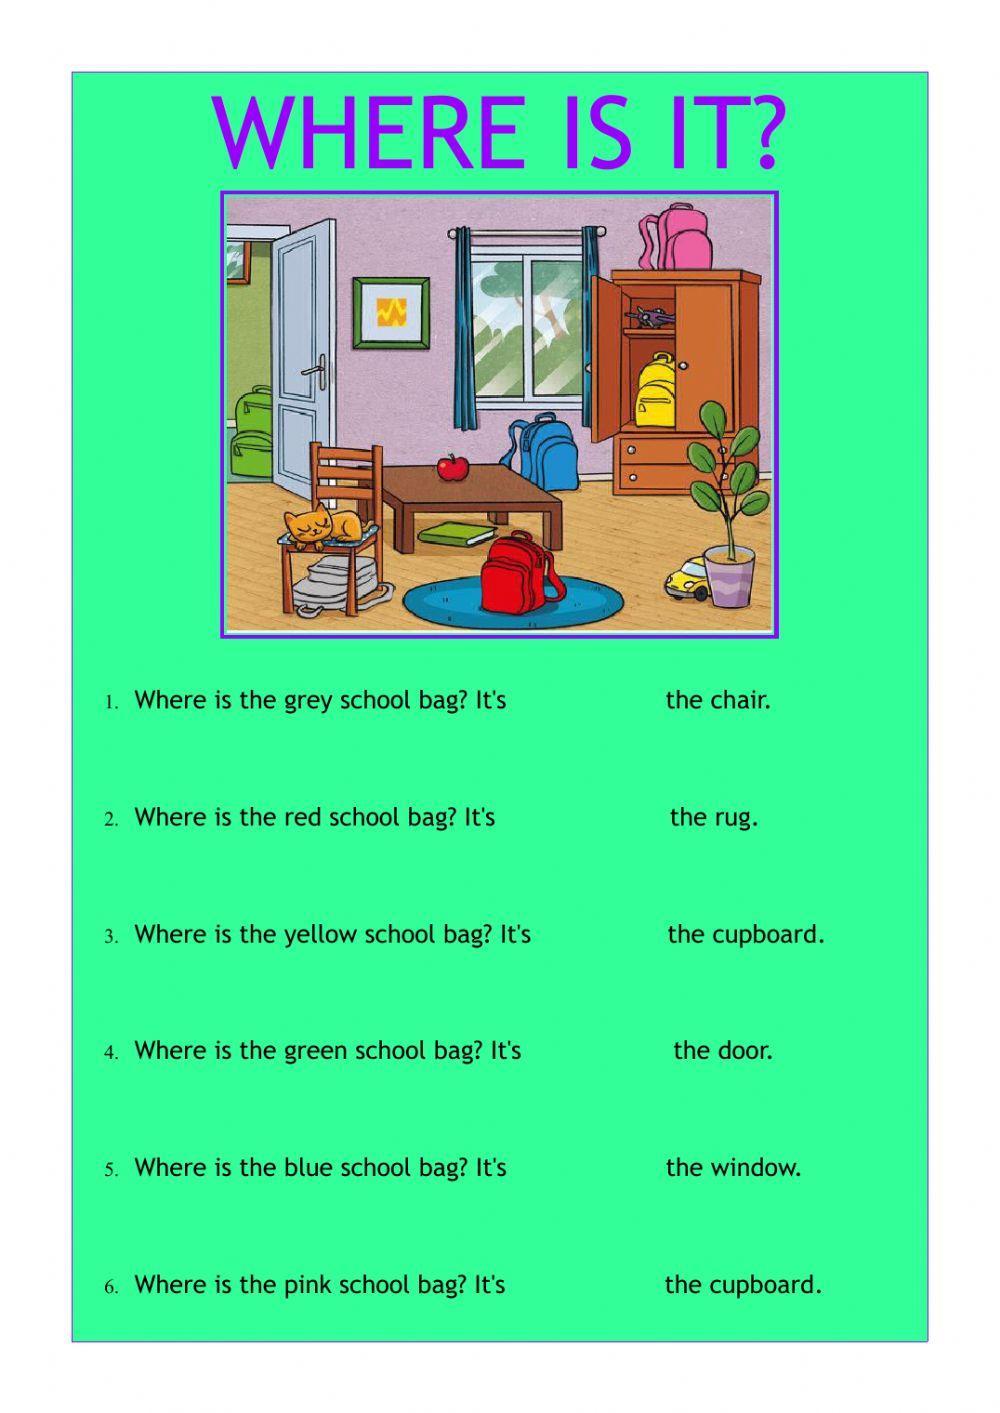 Prepositions of place: in, on, under, behind